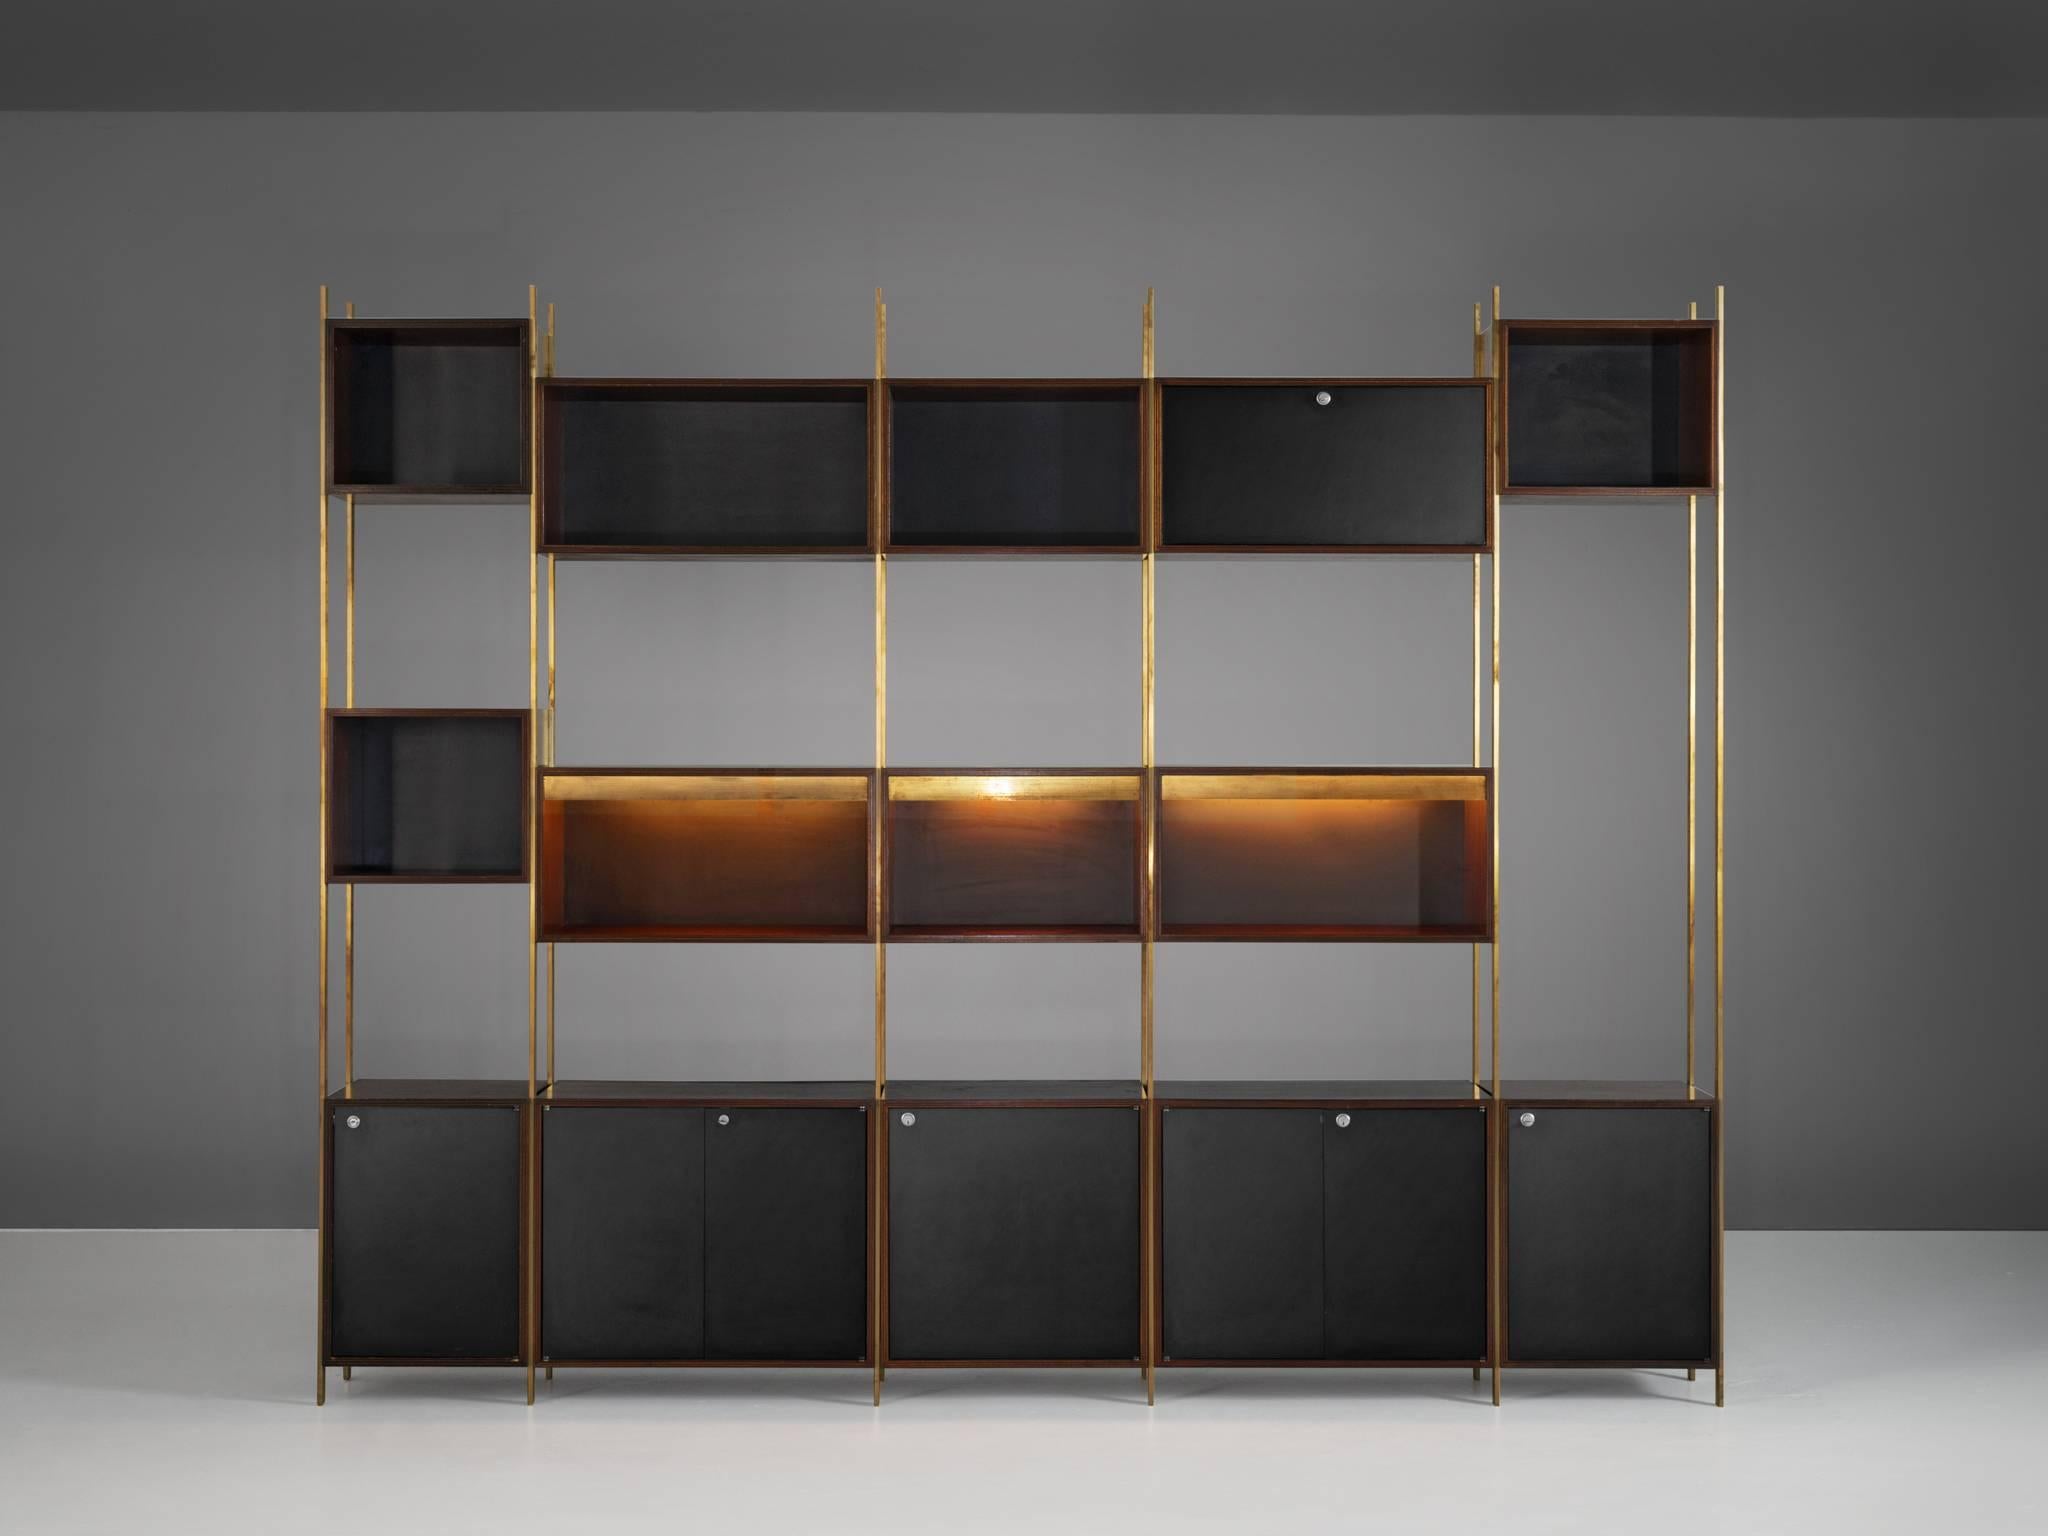 Bookcase, in brass and rosewood, by Jules Wabbes for Mobilier Universel, Belgium 1960s.
 
Rare wall unit designed with the highest precision in furniture making by master furniture-maker Jules Wabbes. This cabinet could be used as a library and room